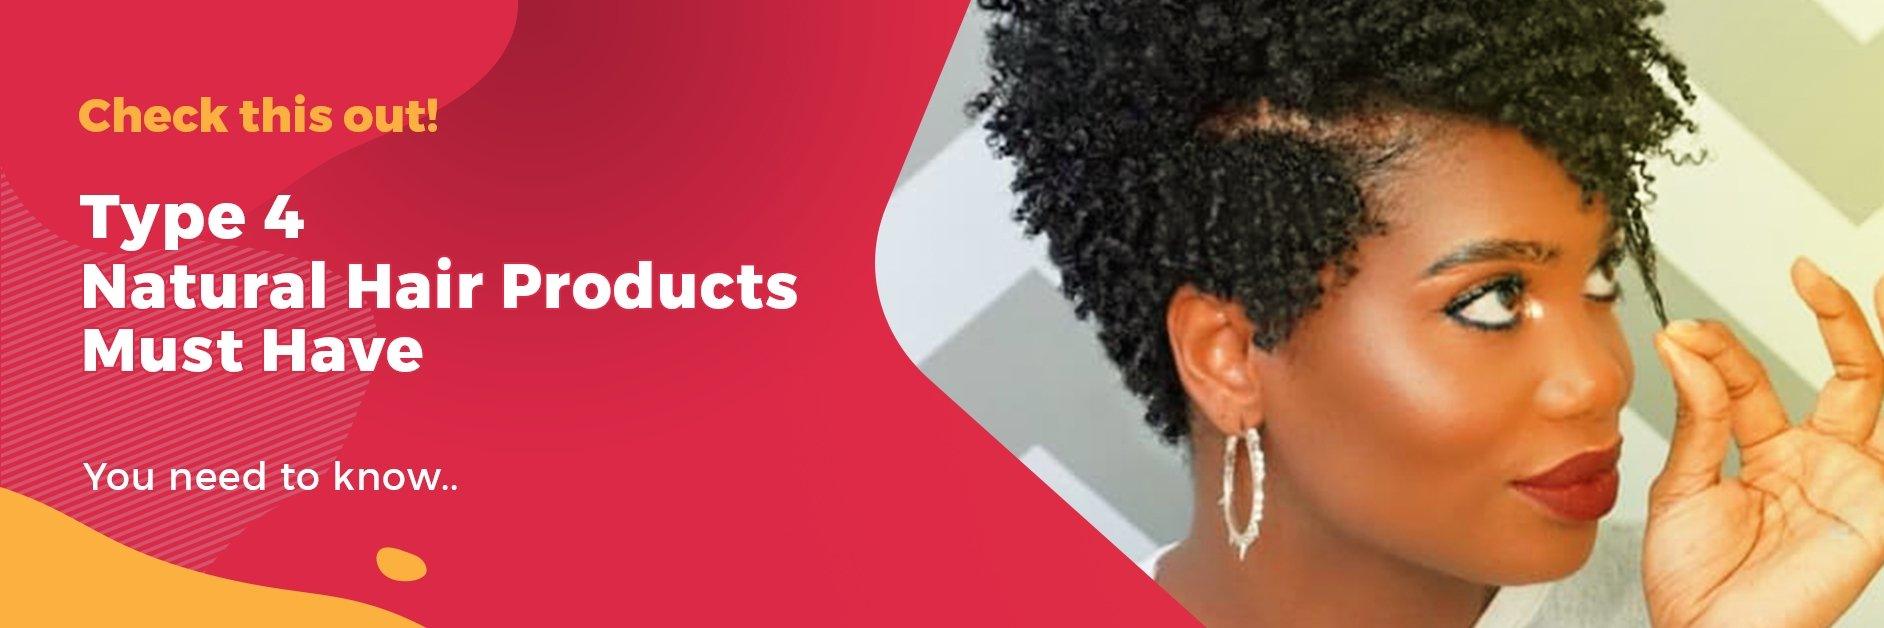 Type 4 Natural Hair Products Must Have - GlammedNaturallyOil